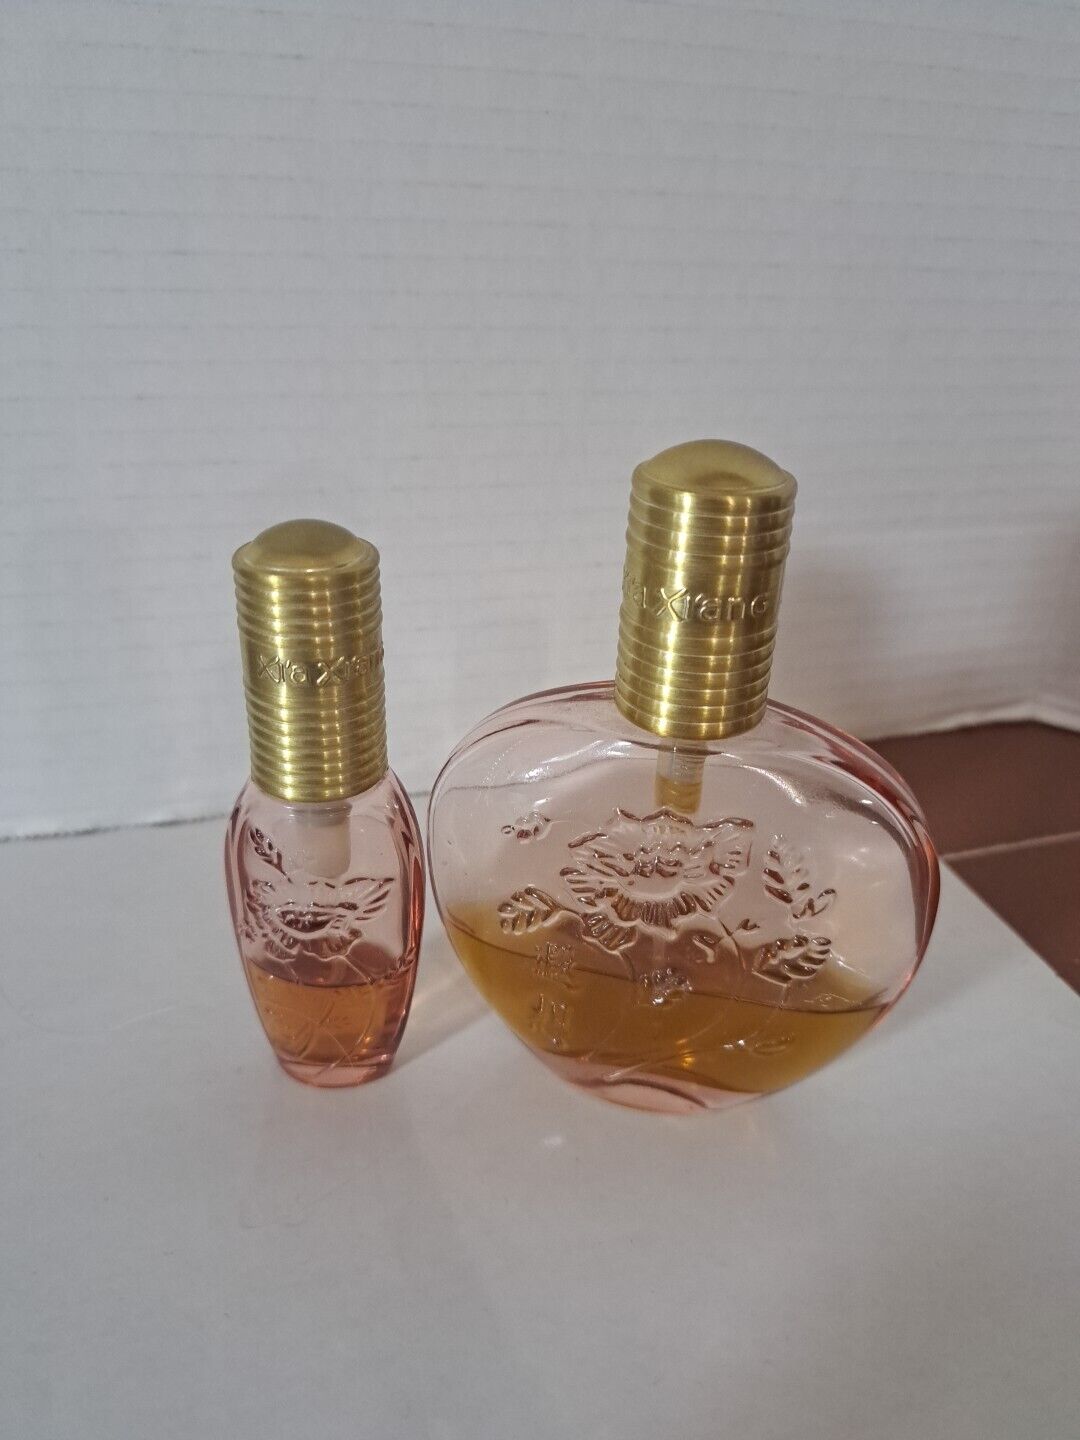 2 Bottles Of  Revlon Xia Xiang Cologne Spray Both About 35% Full.